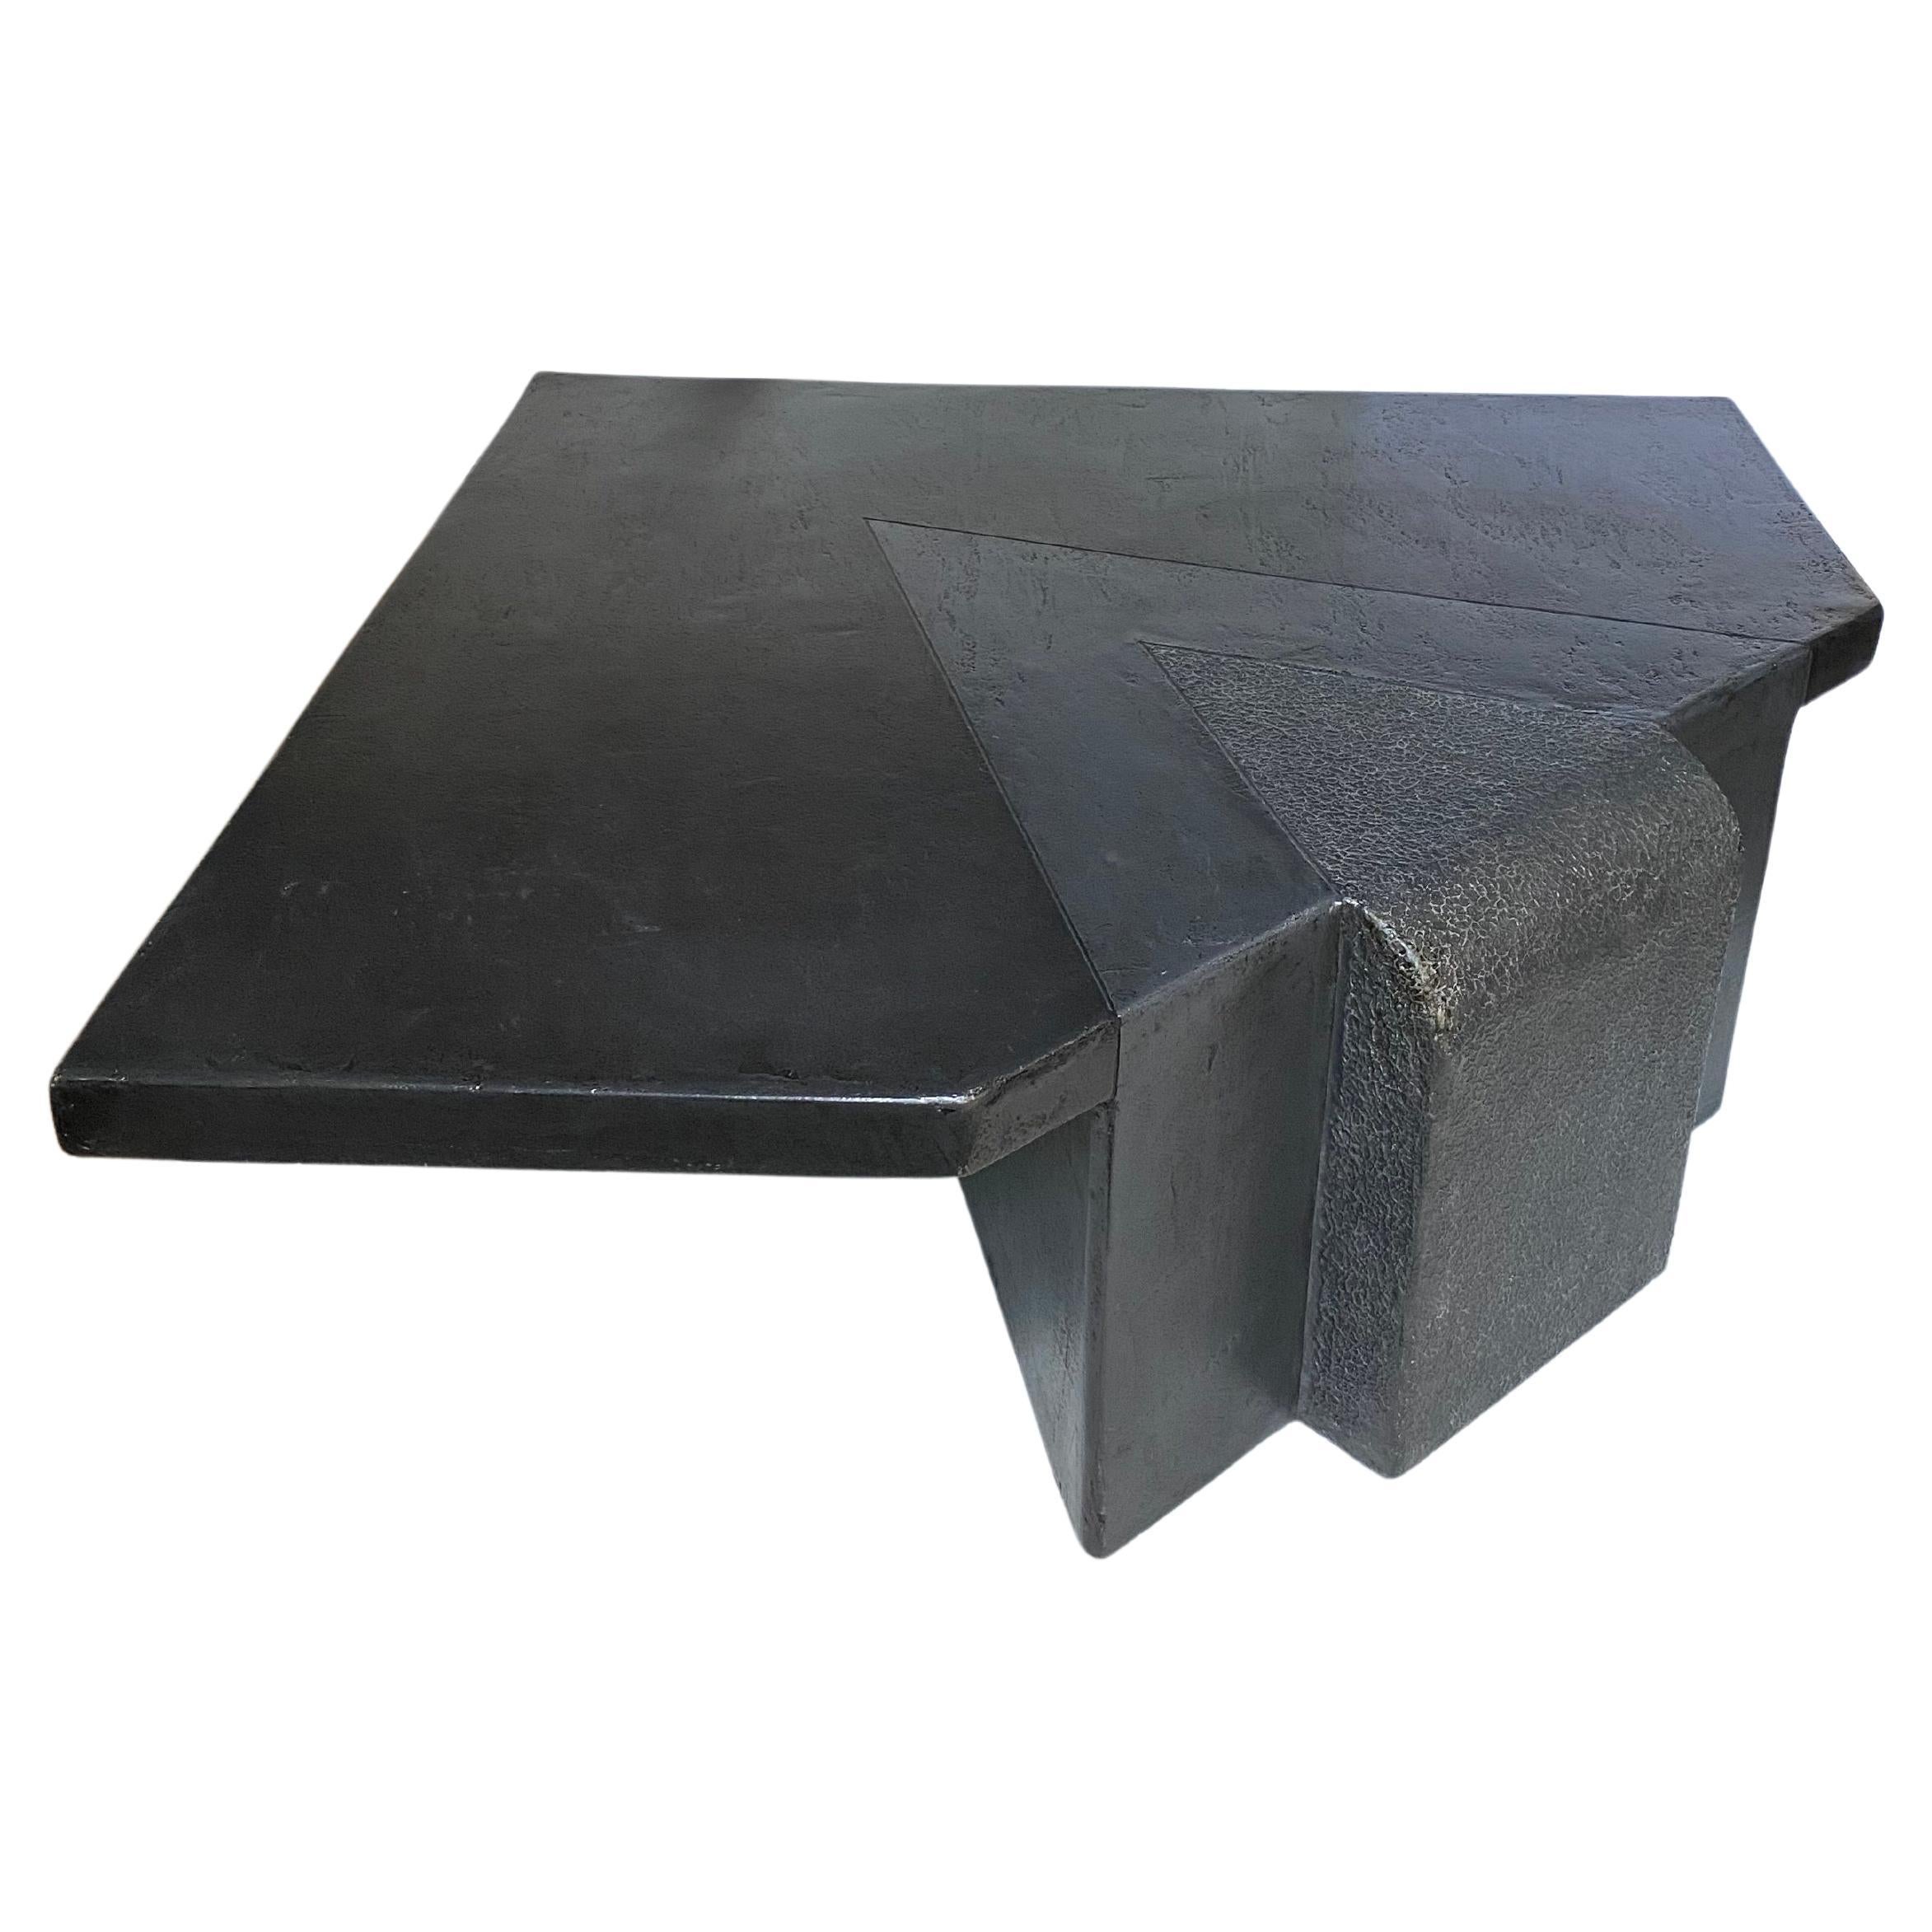 Late 20th Century Sculptural Post-Modern Cantilever Geometric Coffee Table Black Plaster 1980s For Sale